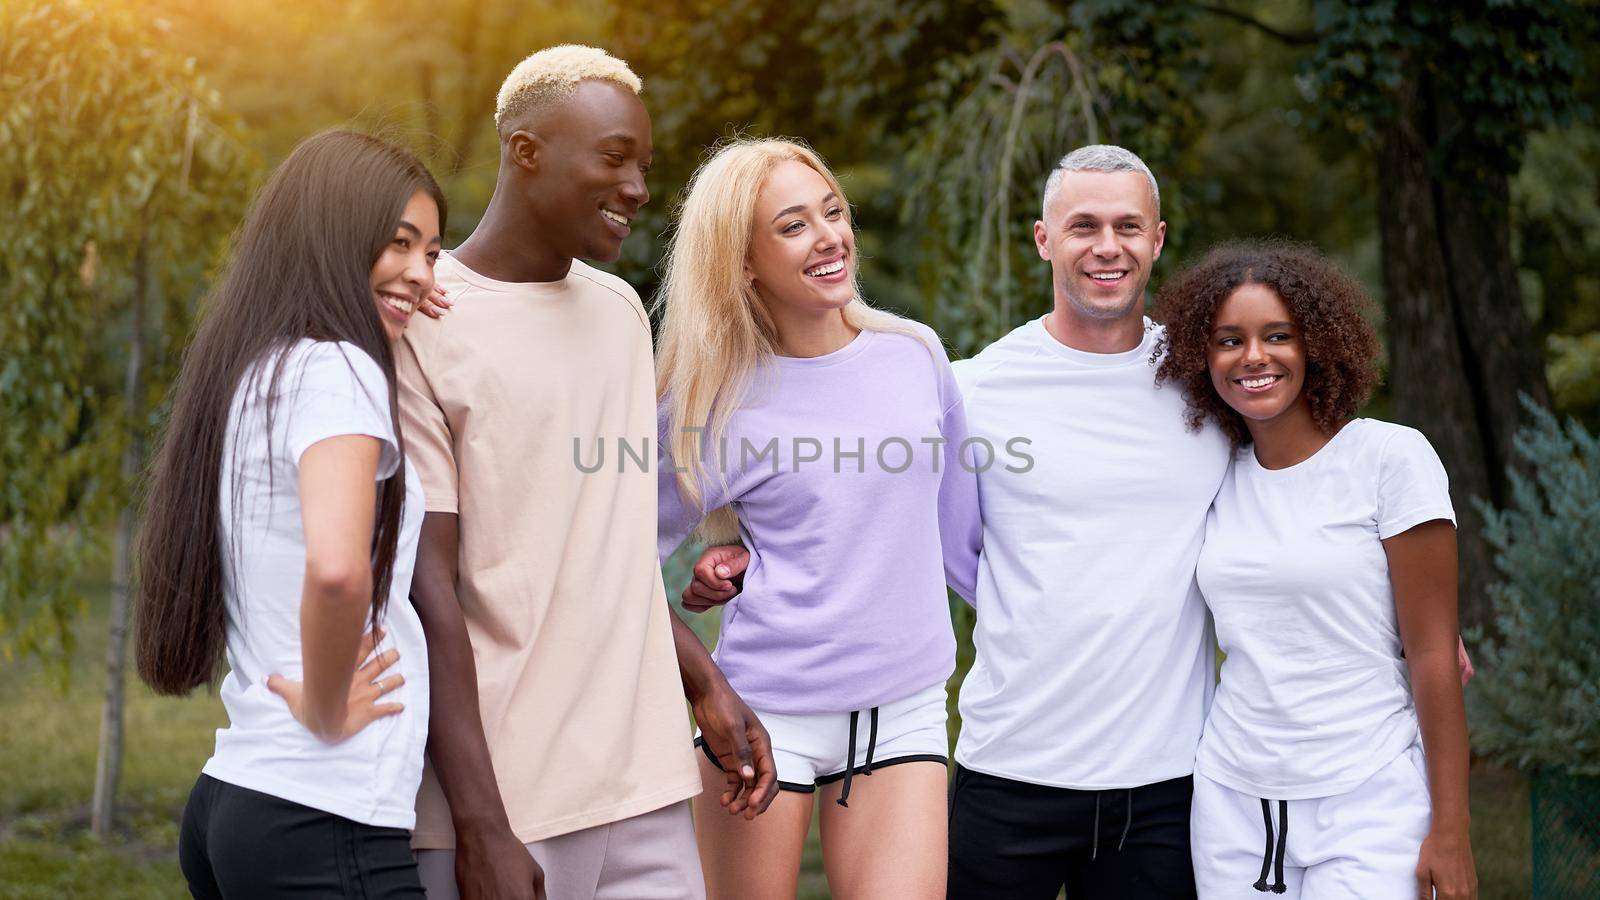 Multi-ethnic group teenage friends. African-american asian caucasian student spending time together Multiracial friendship Happy smiling People dressed black white sportswear meeting outdoor